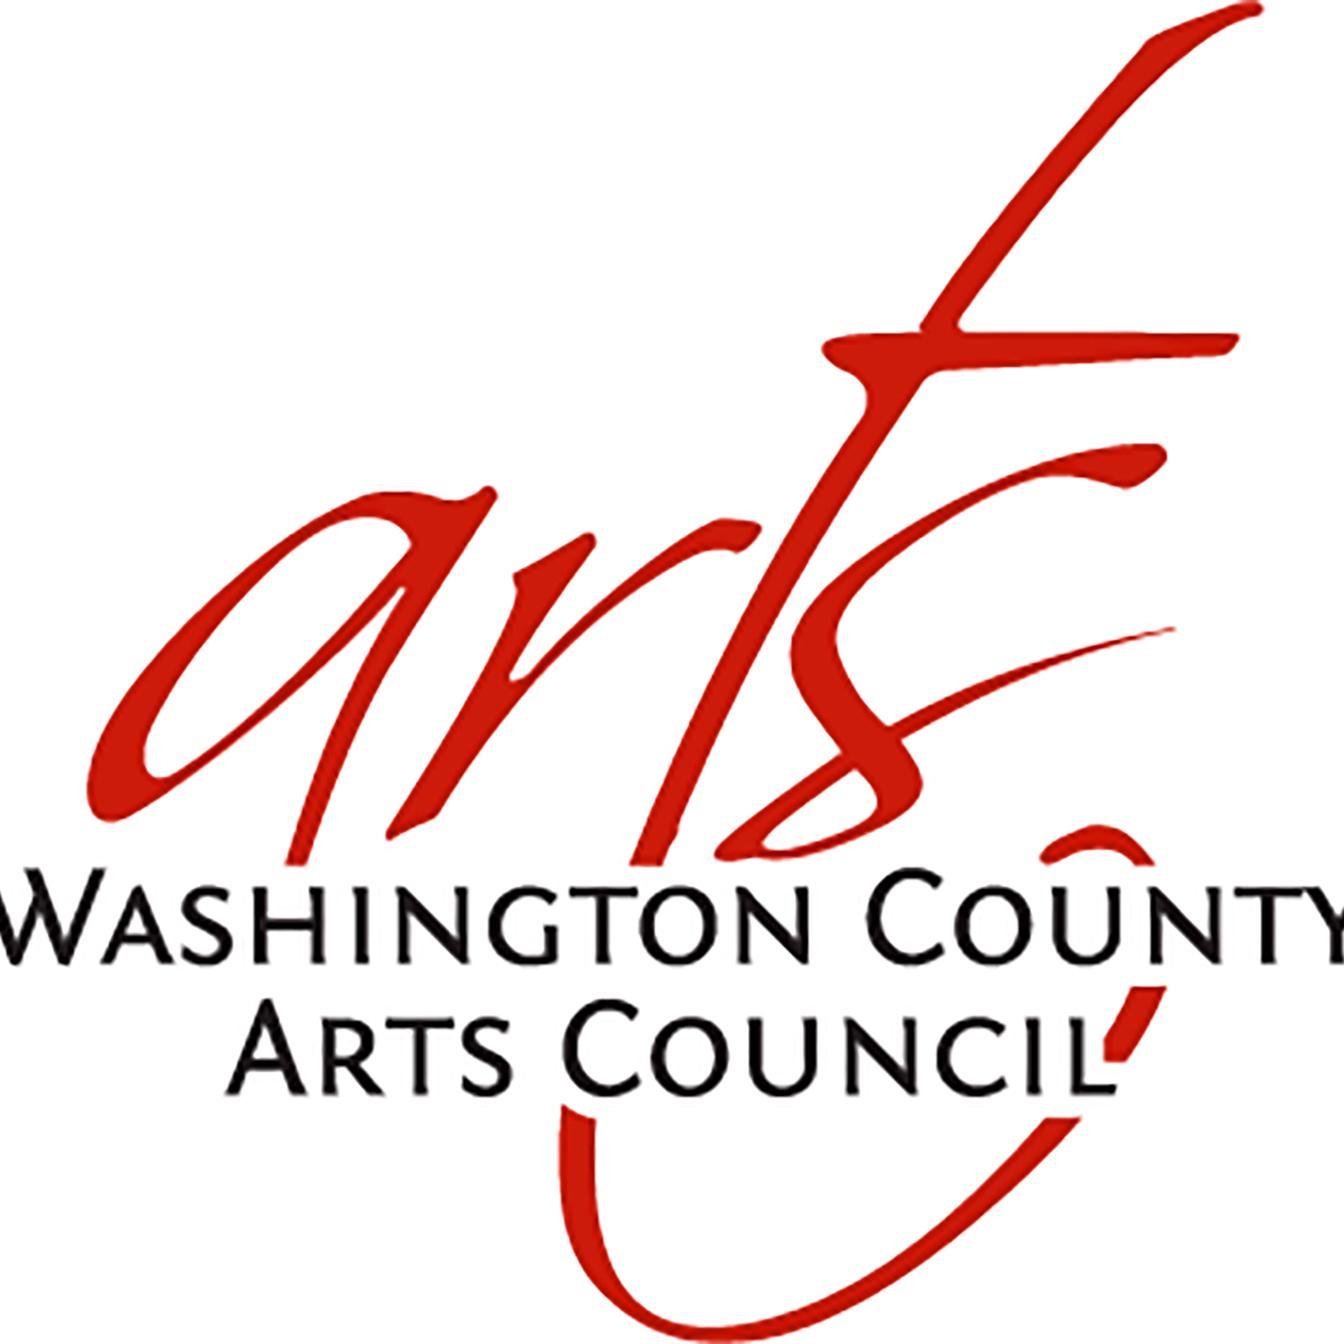 WCAC coordinates and promotes leadership and policies that encourage and foster a strong, vibrant, and cohesive arts community.